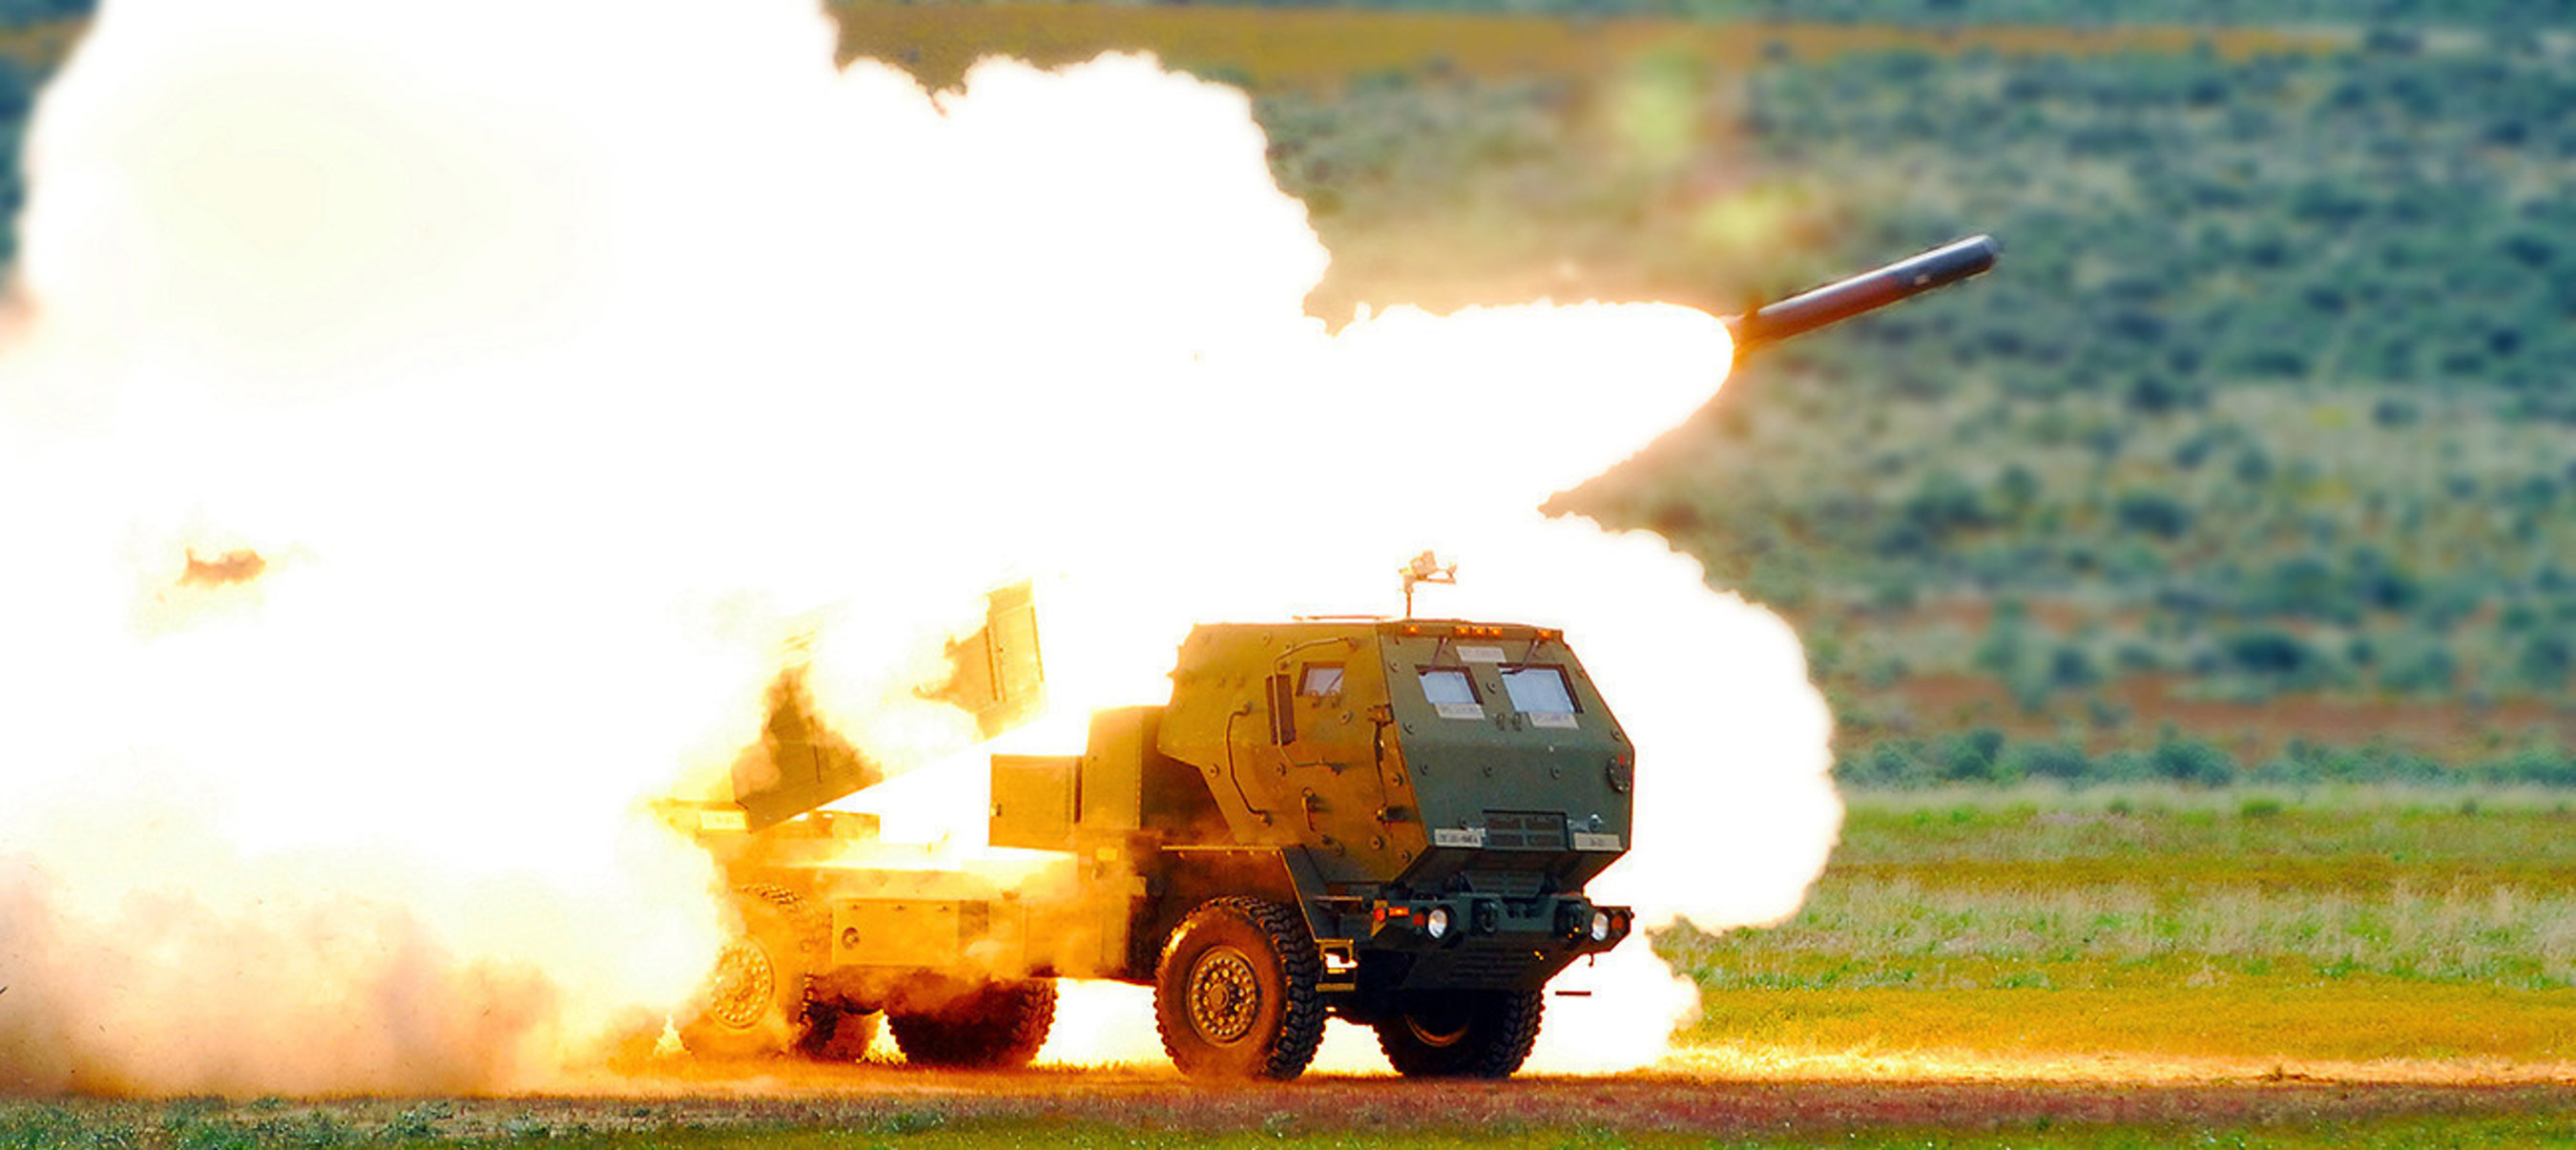 Lockheed Martin High Mobility Artillery Rocket System (HIMARS) is a strategic capability, improving homeland and important asset defense while reducing overall mission costs.